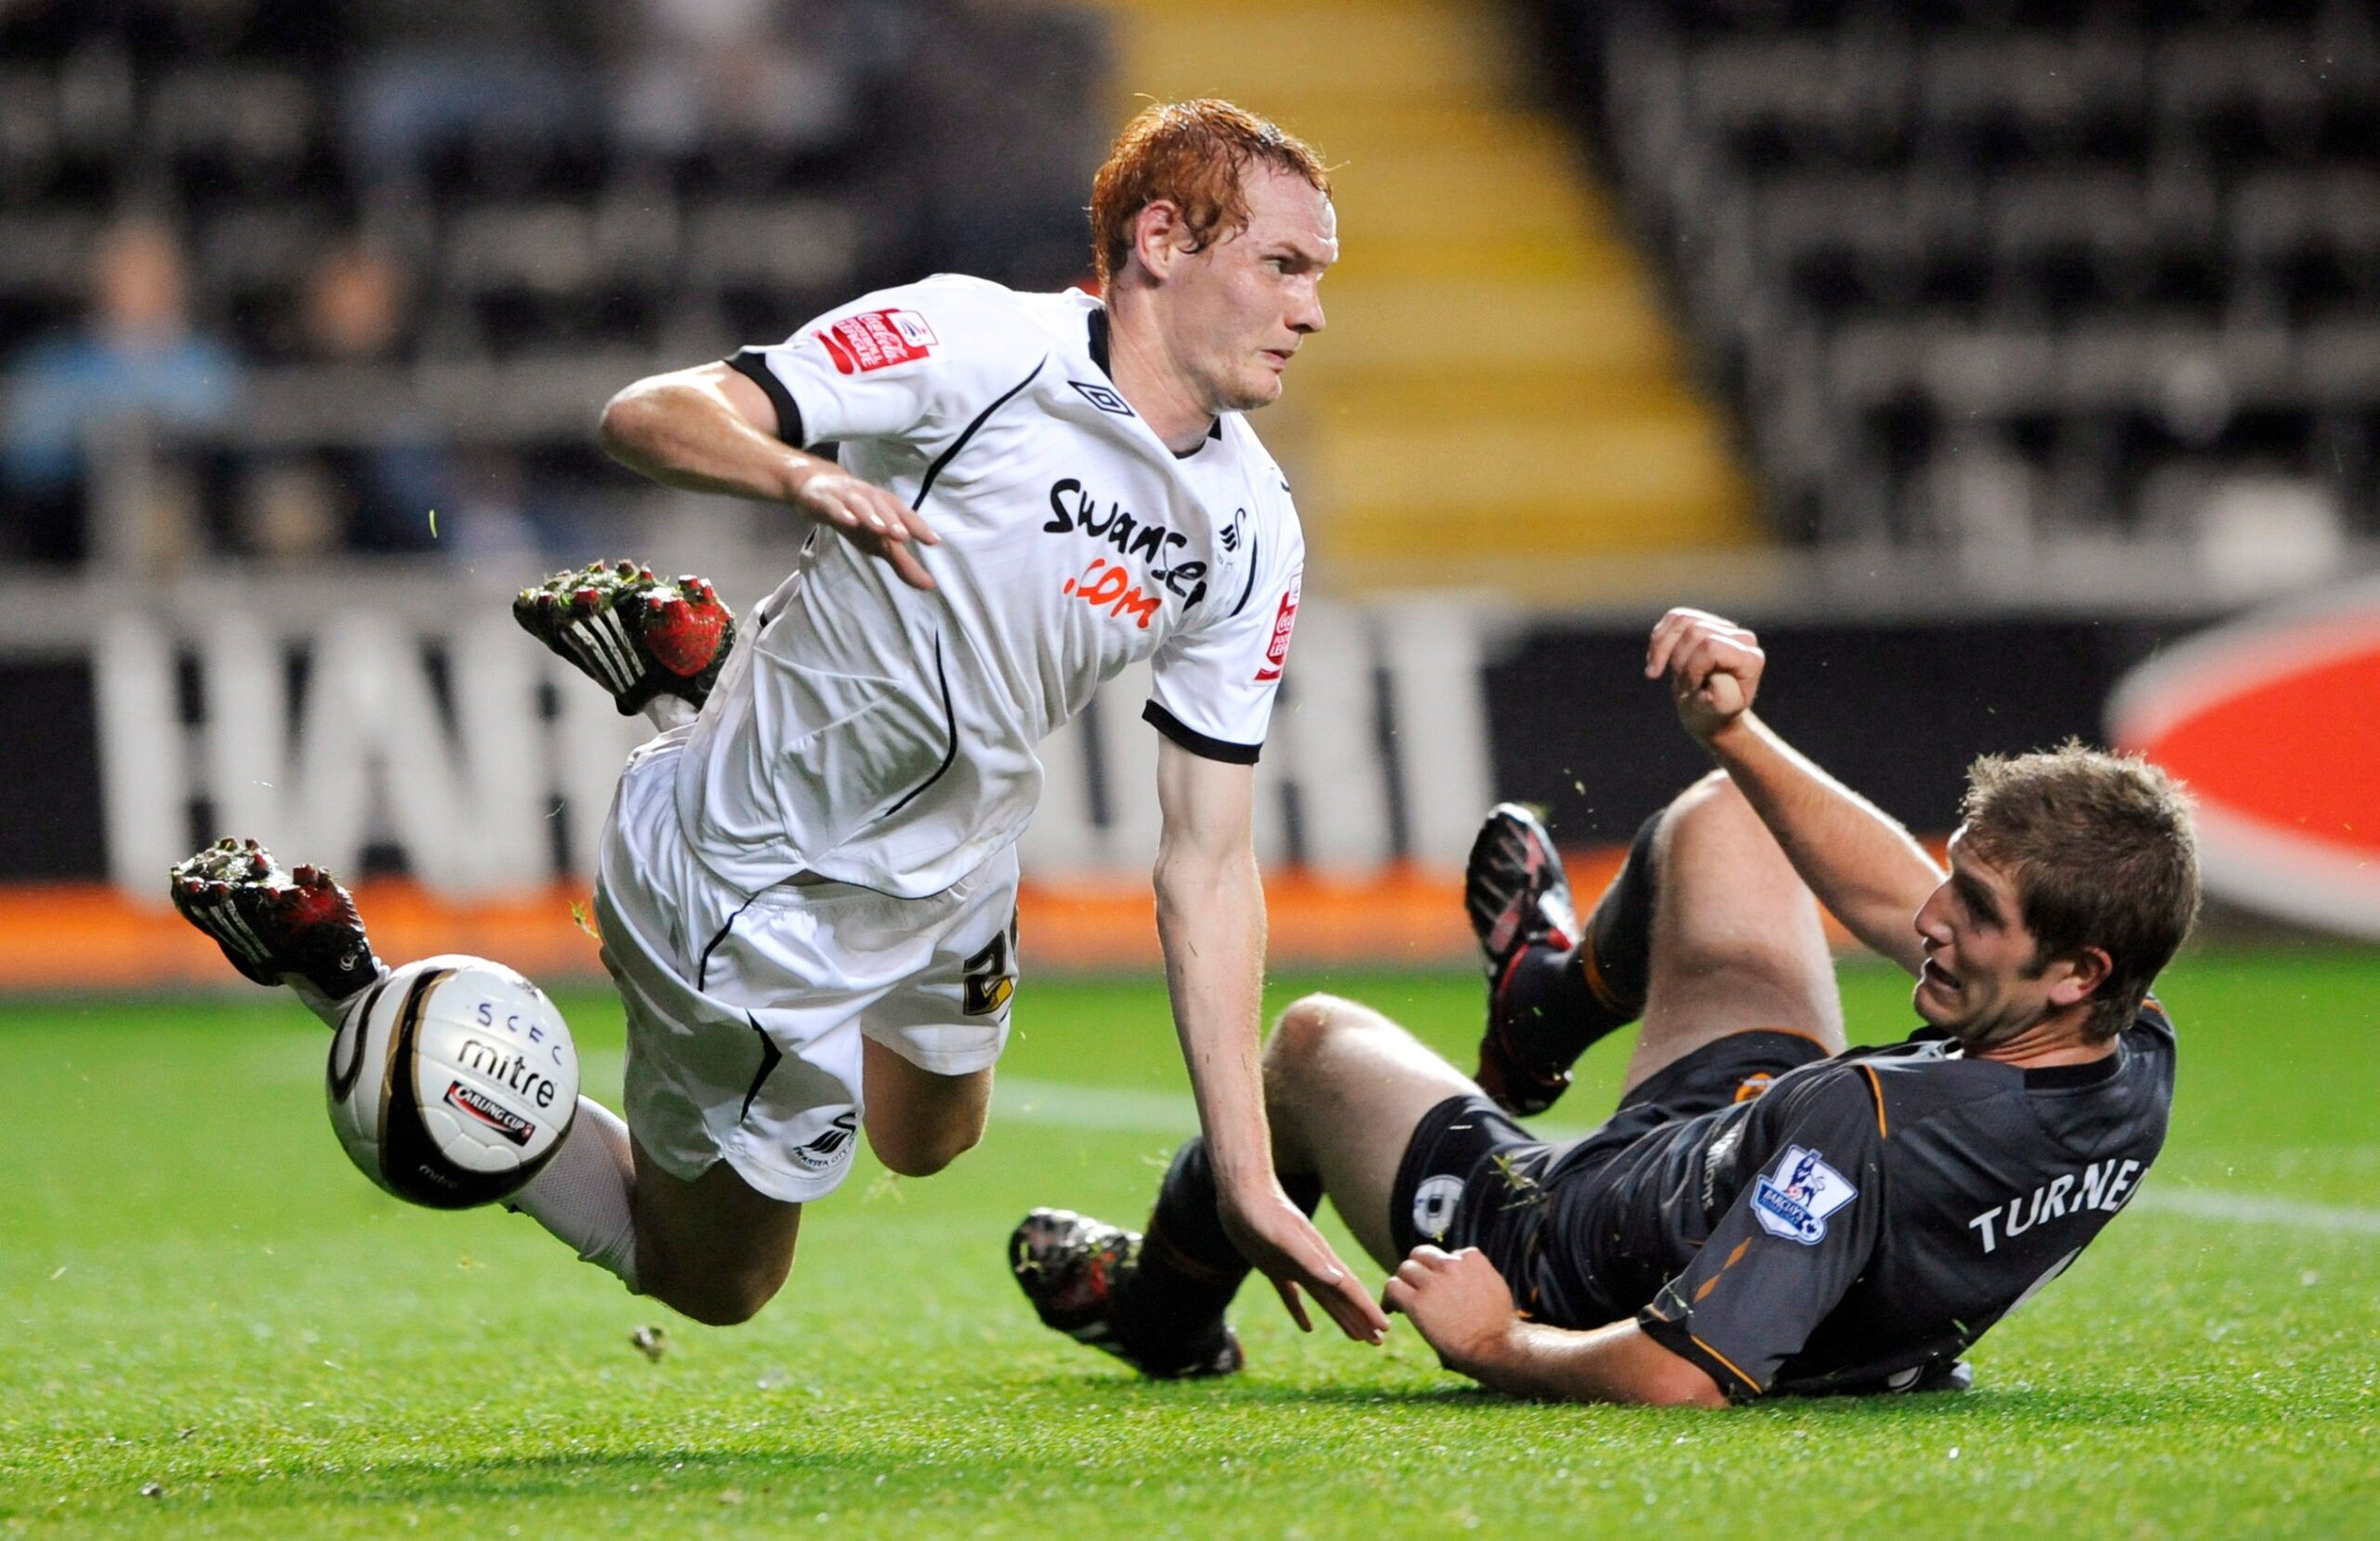 Football - Swansea City v Hull City - Carling Cup Second Round - Liberty Stadium - 08/09 , 26/8/08 
Shaun MacDonald - Swansea City in action against Hull City 
Mandatory Credit: Action Images / Henry Browne